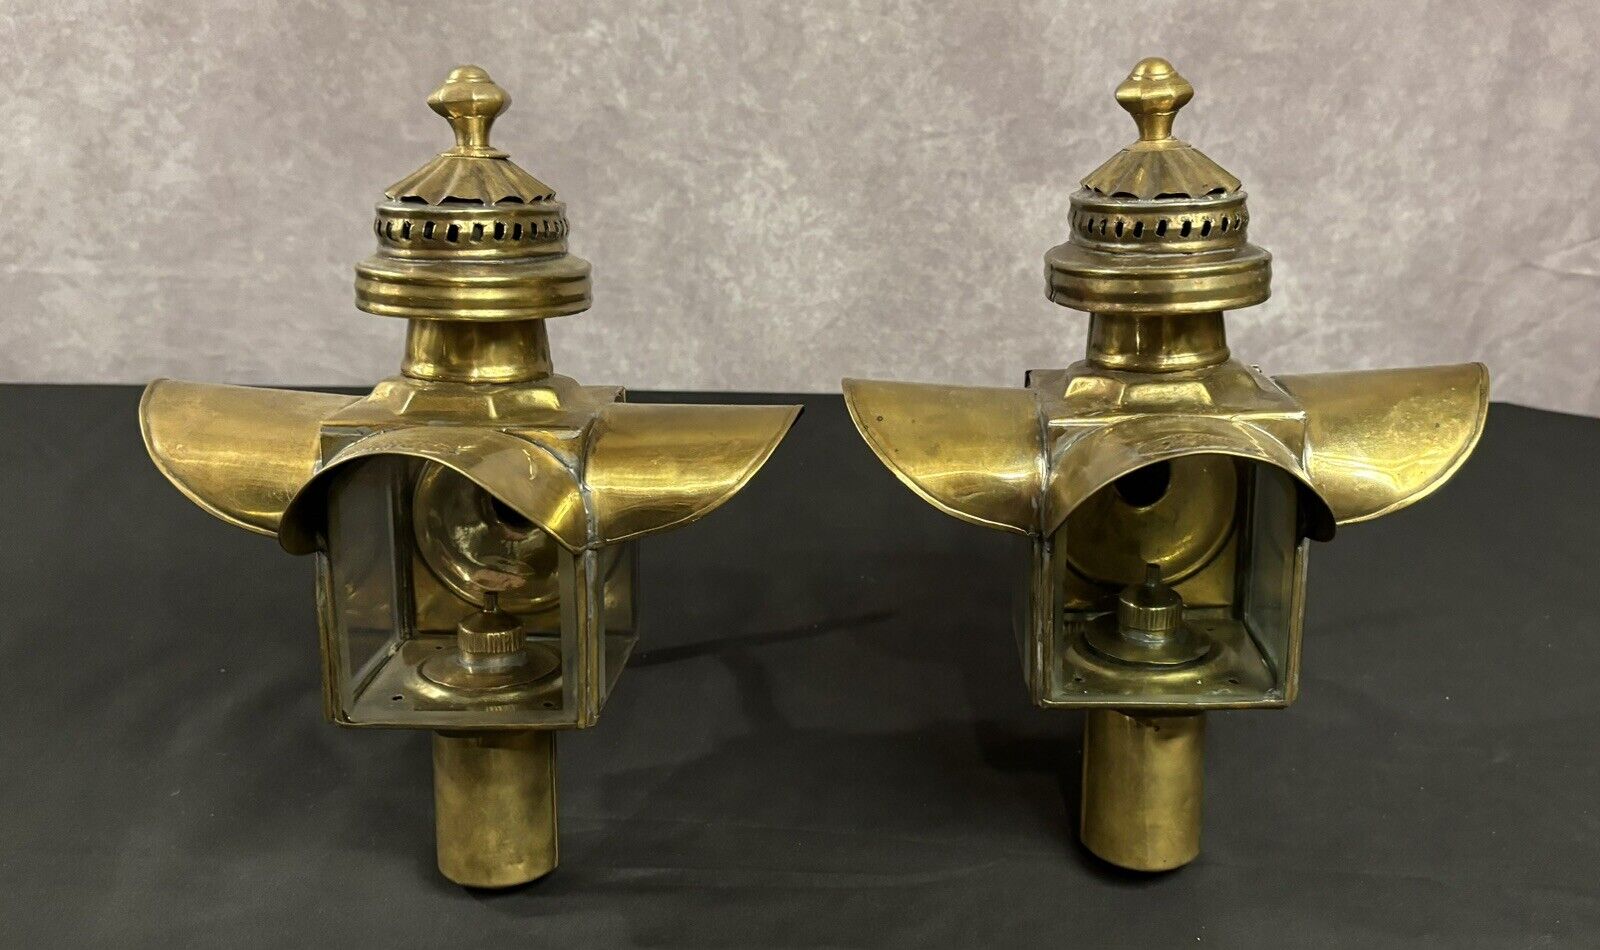 Antique Brass Carriage Lamps Headlamps Vintage Early 1900s Oil Burners & Mounts